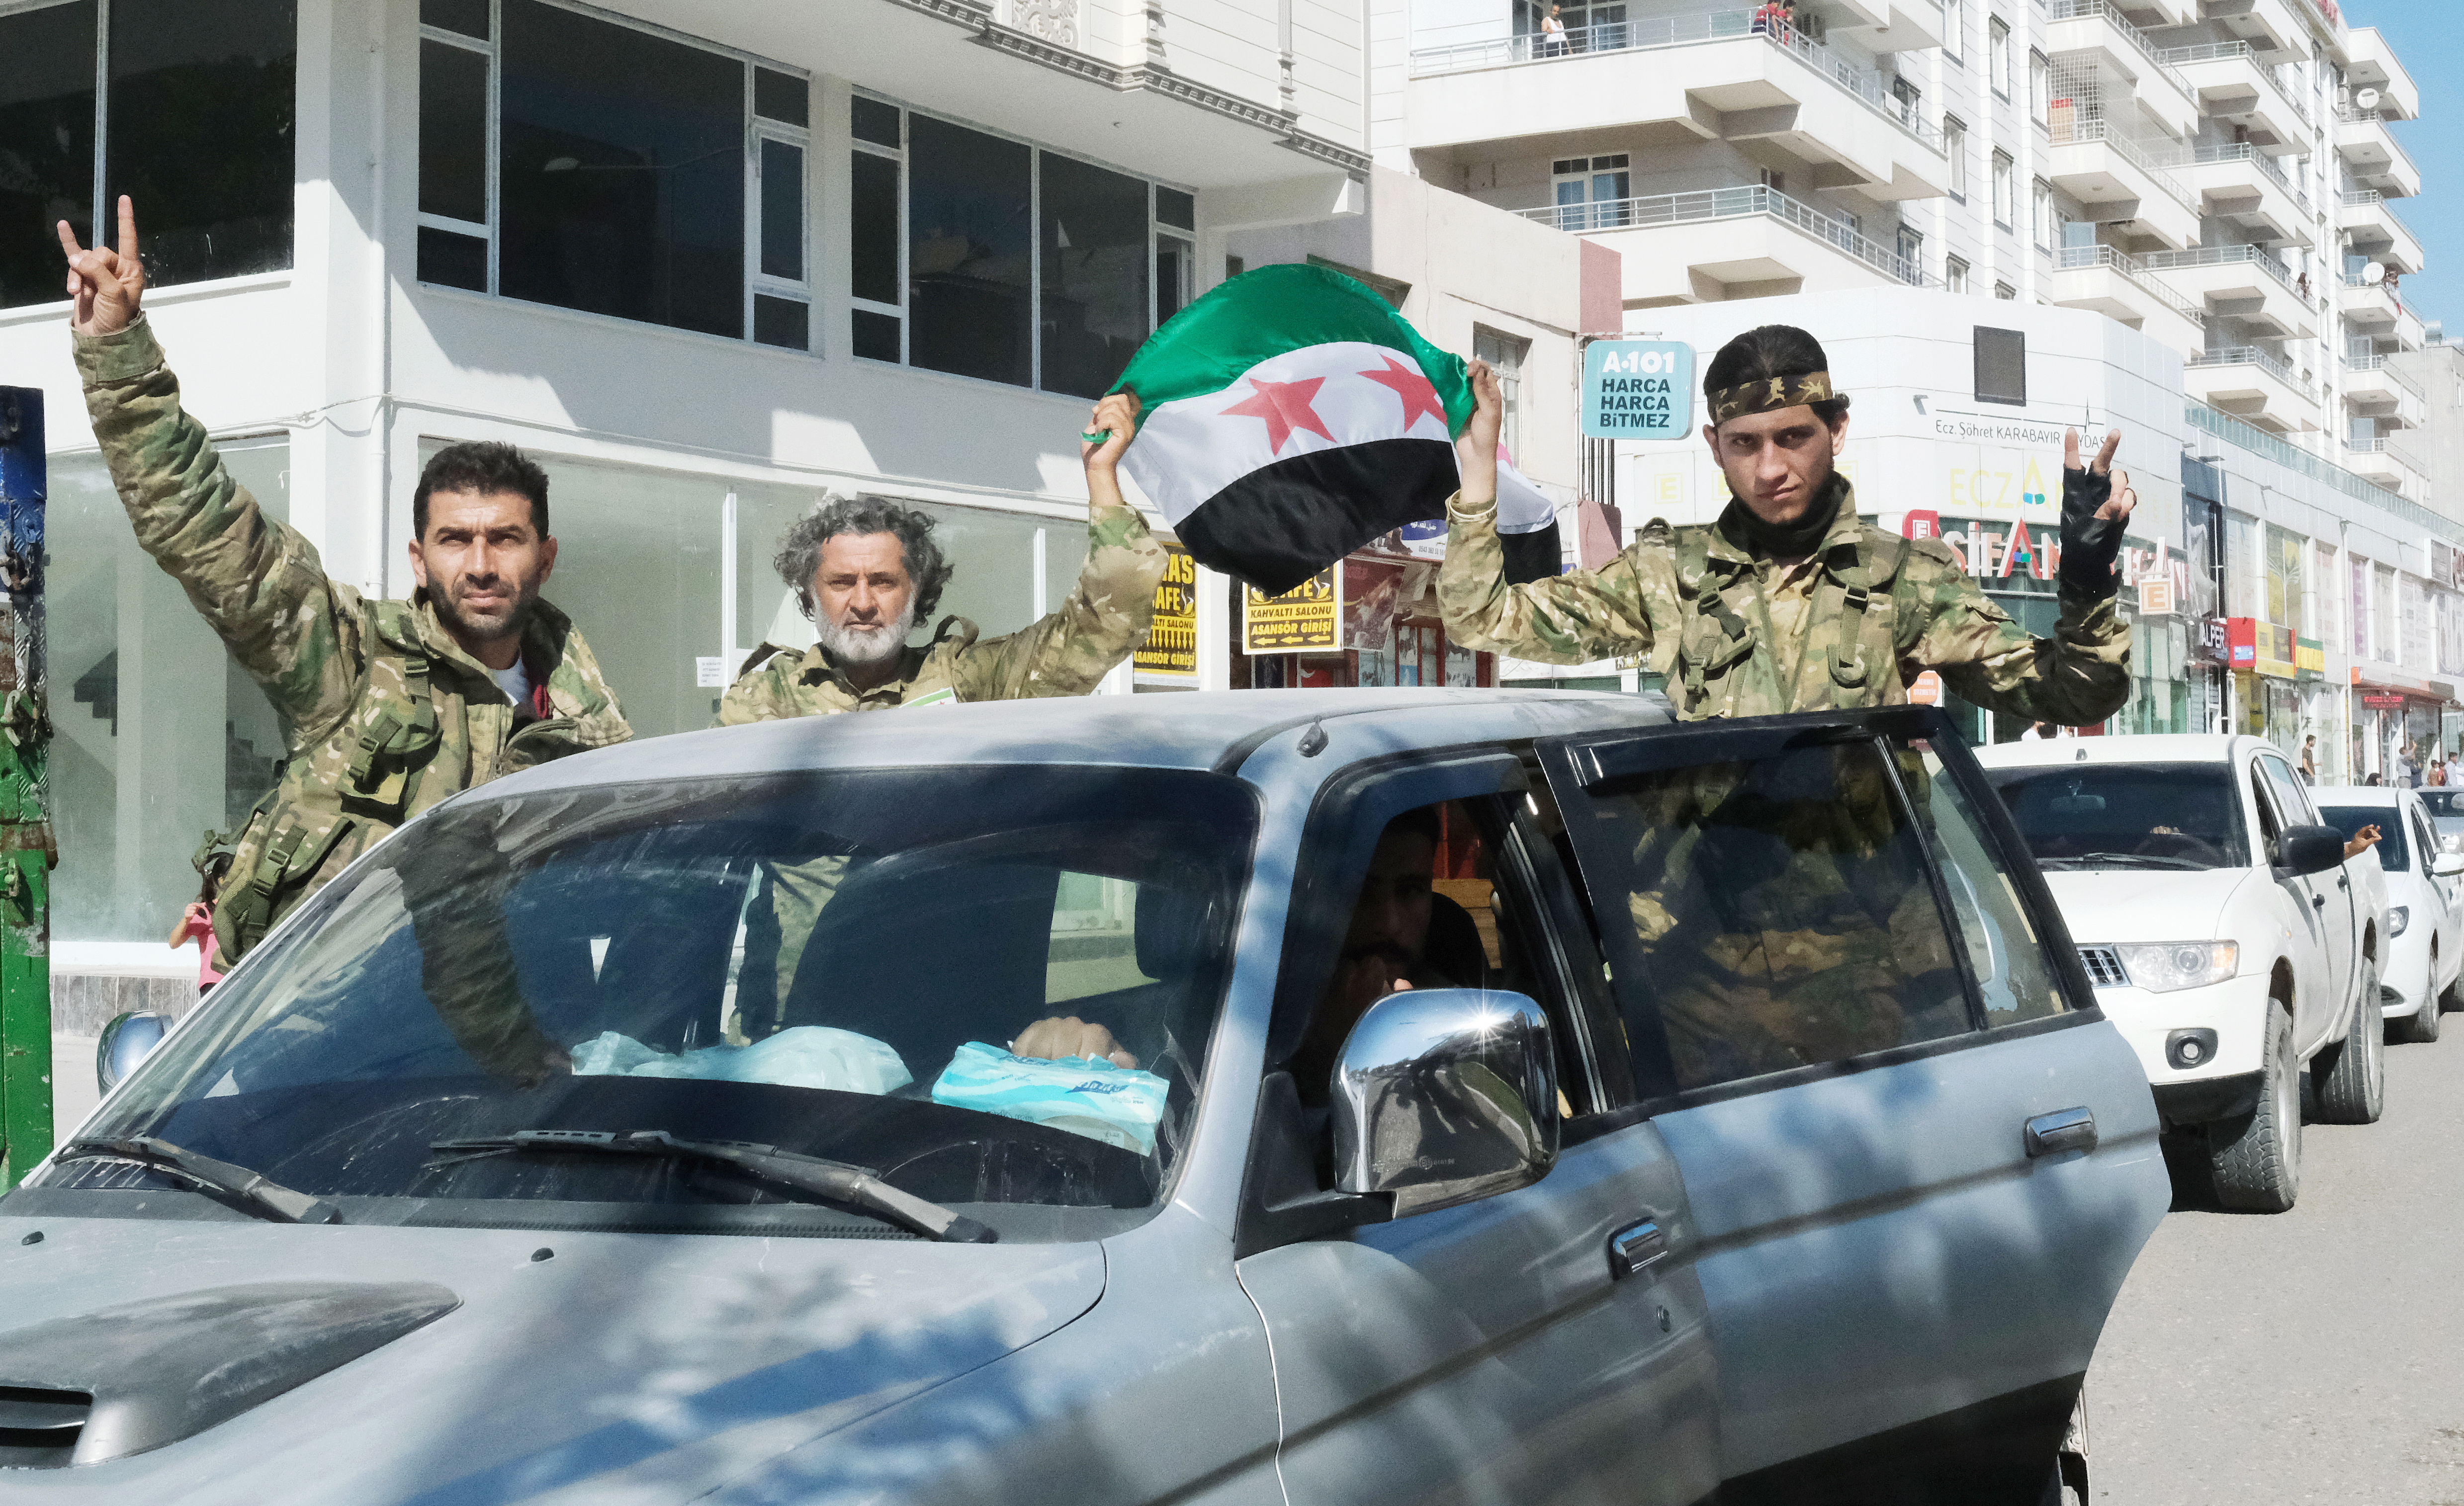 epa07909327 Members of Syrian National Army wave as they are on the way to Northern Syria for a military operation in Kurdish areas, near the Syrian border, in Akcakale, Sanliurfa, Turkey 10 October 2019. Turkey has launched an offensive targeting Kurdish forces in north-eastern Syria, days after the US withdrew troops from the region.  EPA/STR